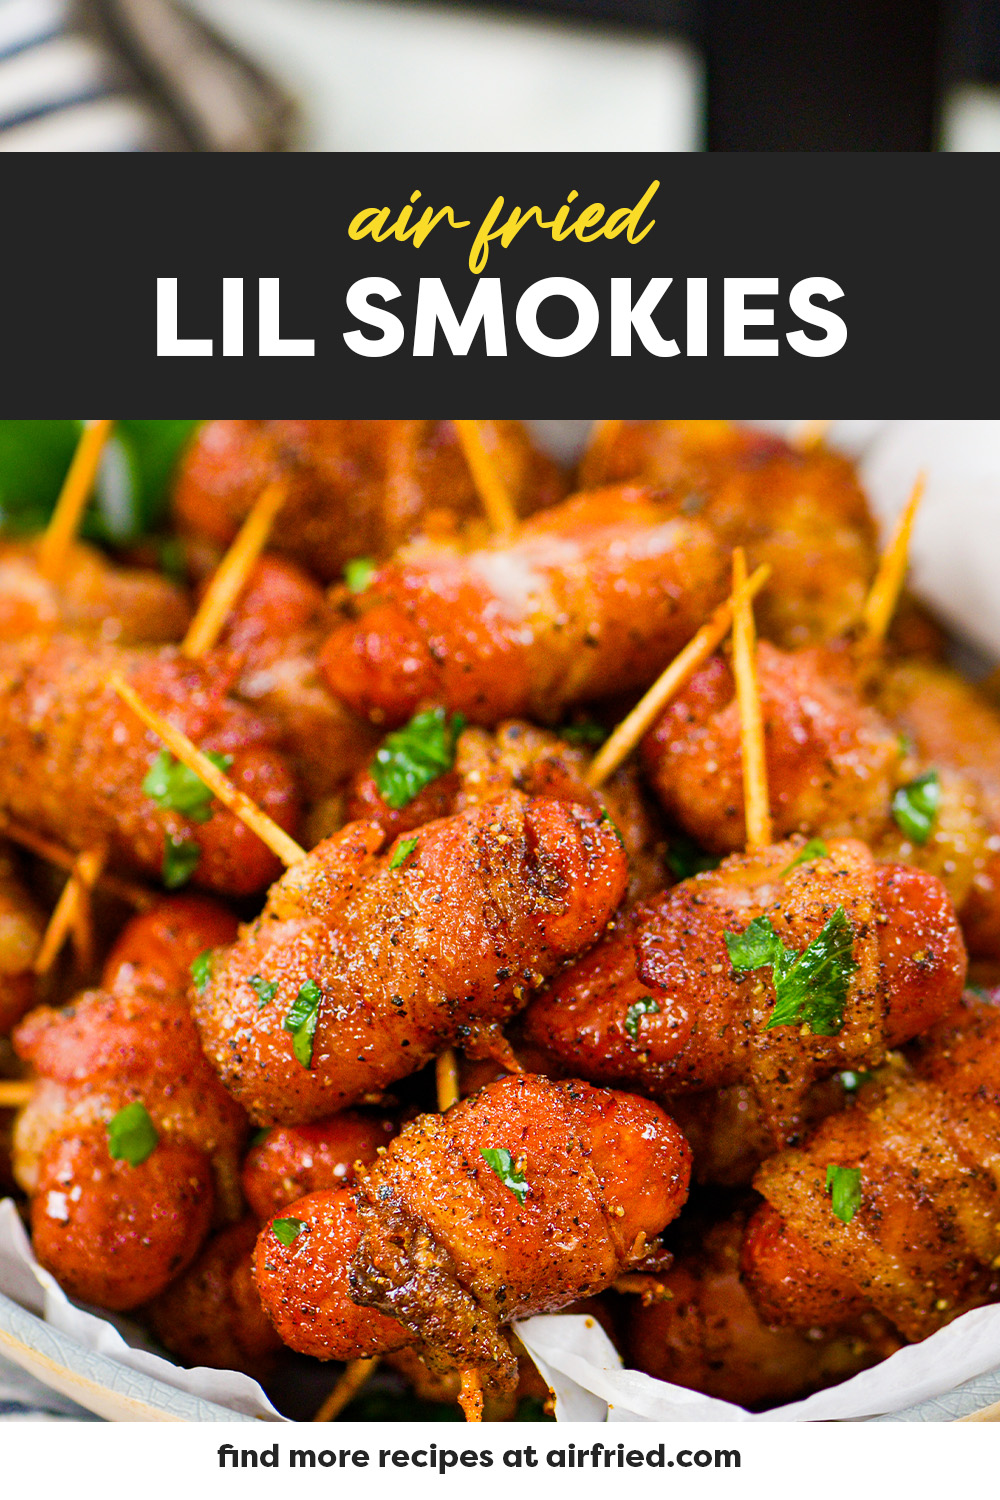 Making Bacon Wrapped Lil Smokies in the air fryer is so quick and easy (just 7 minutes cook time!) and these make the perfect party food! We toss these in a mix of spices to make the best little snack!